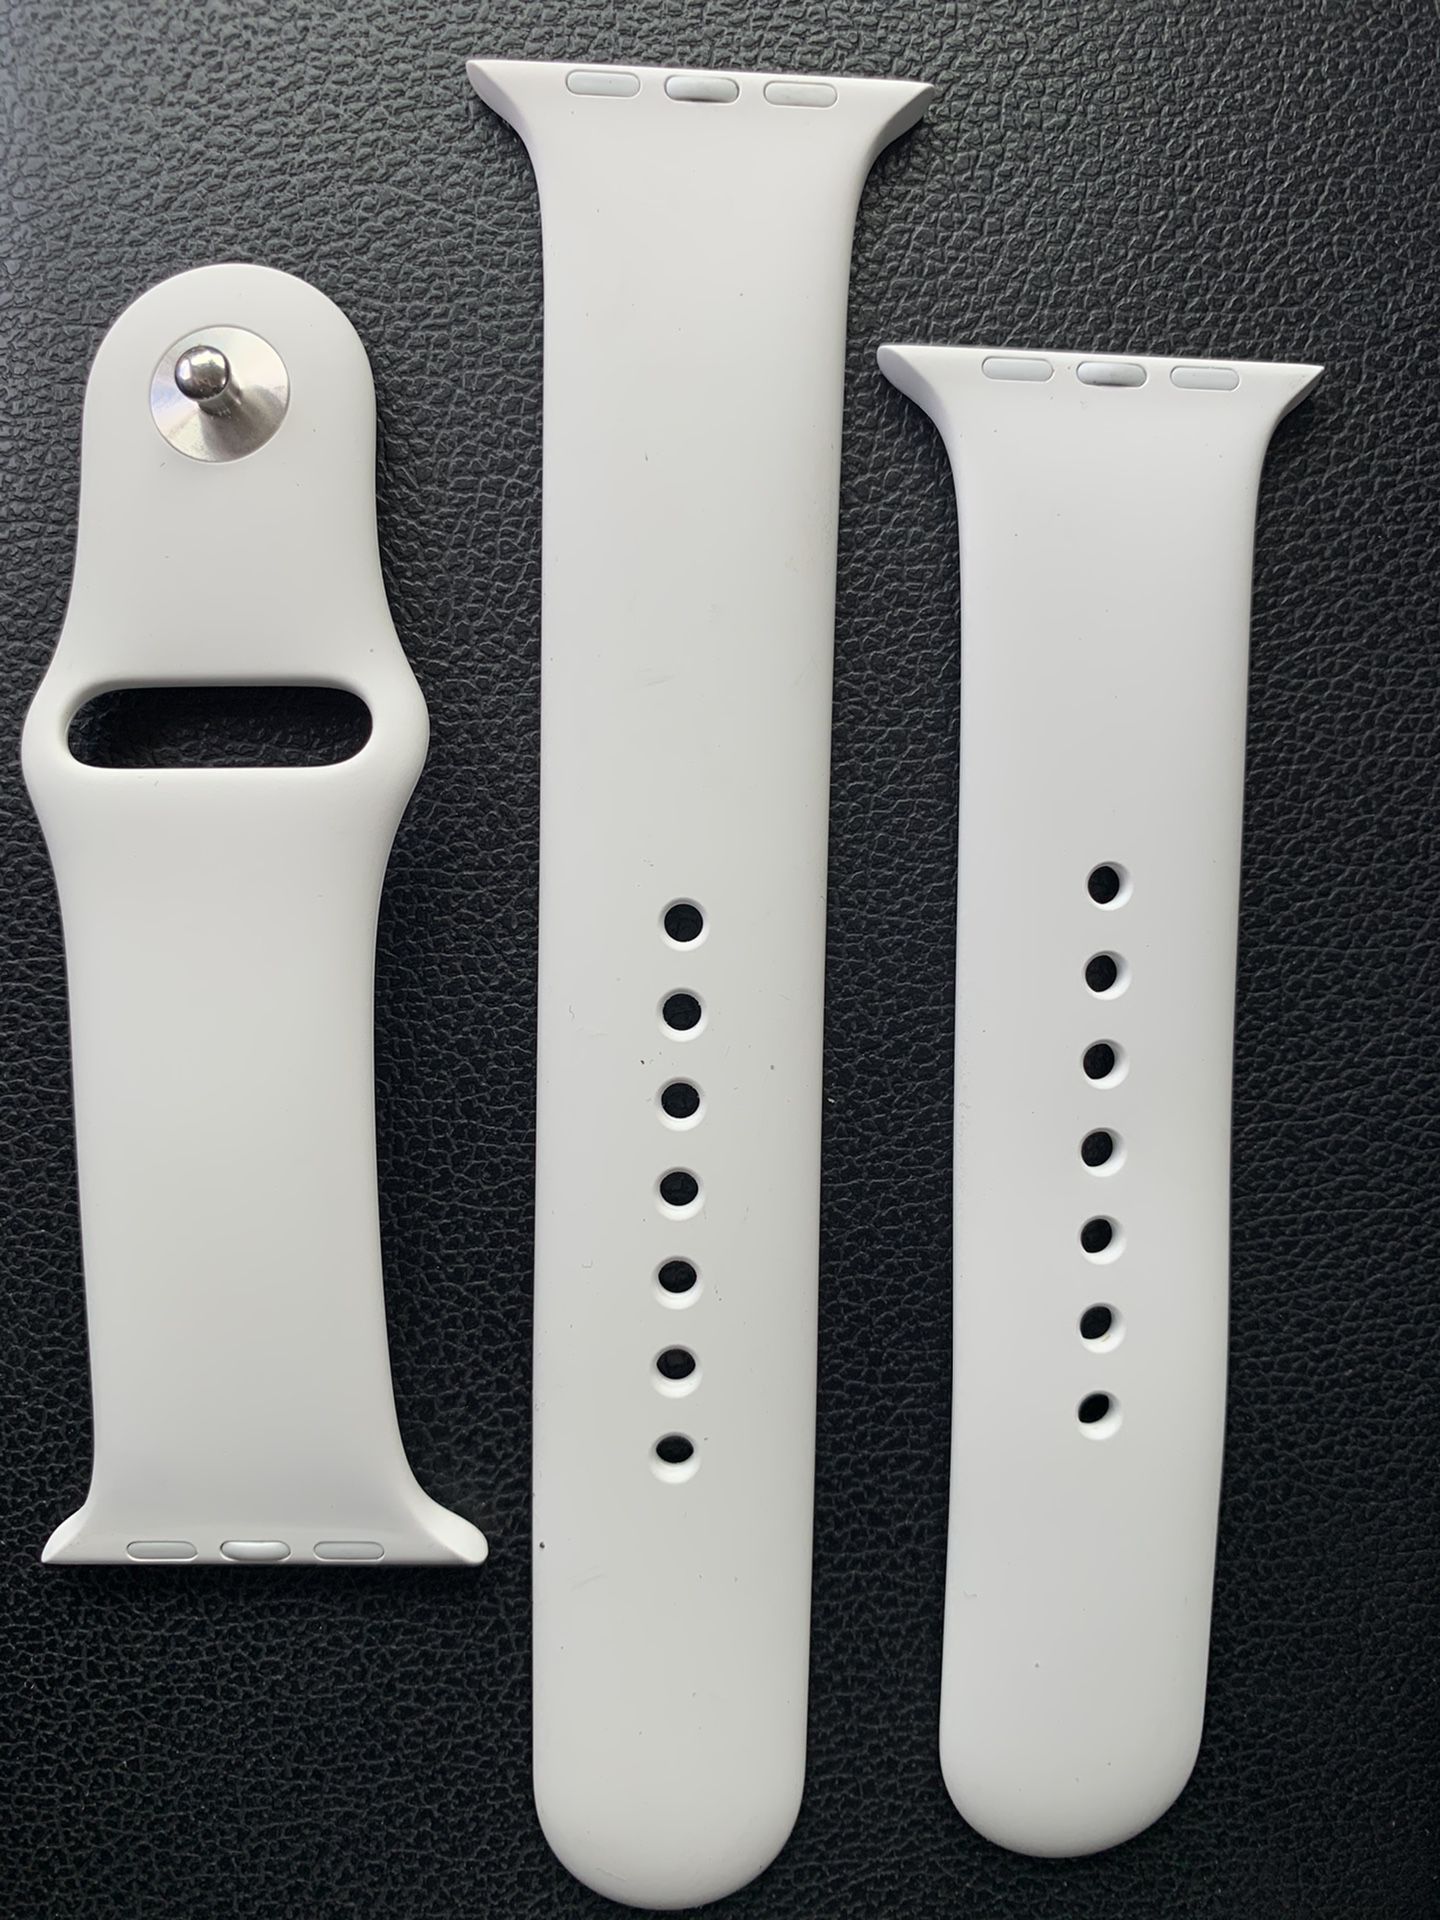 Brand new authentic Apple Watch white sport band for 42mm 44mm watches perfect large and small/medium bands included.